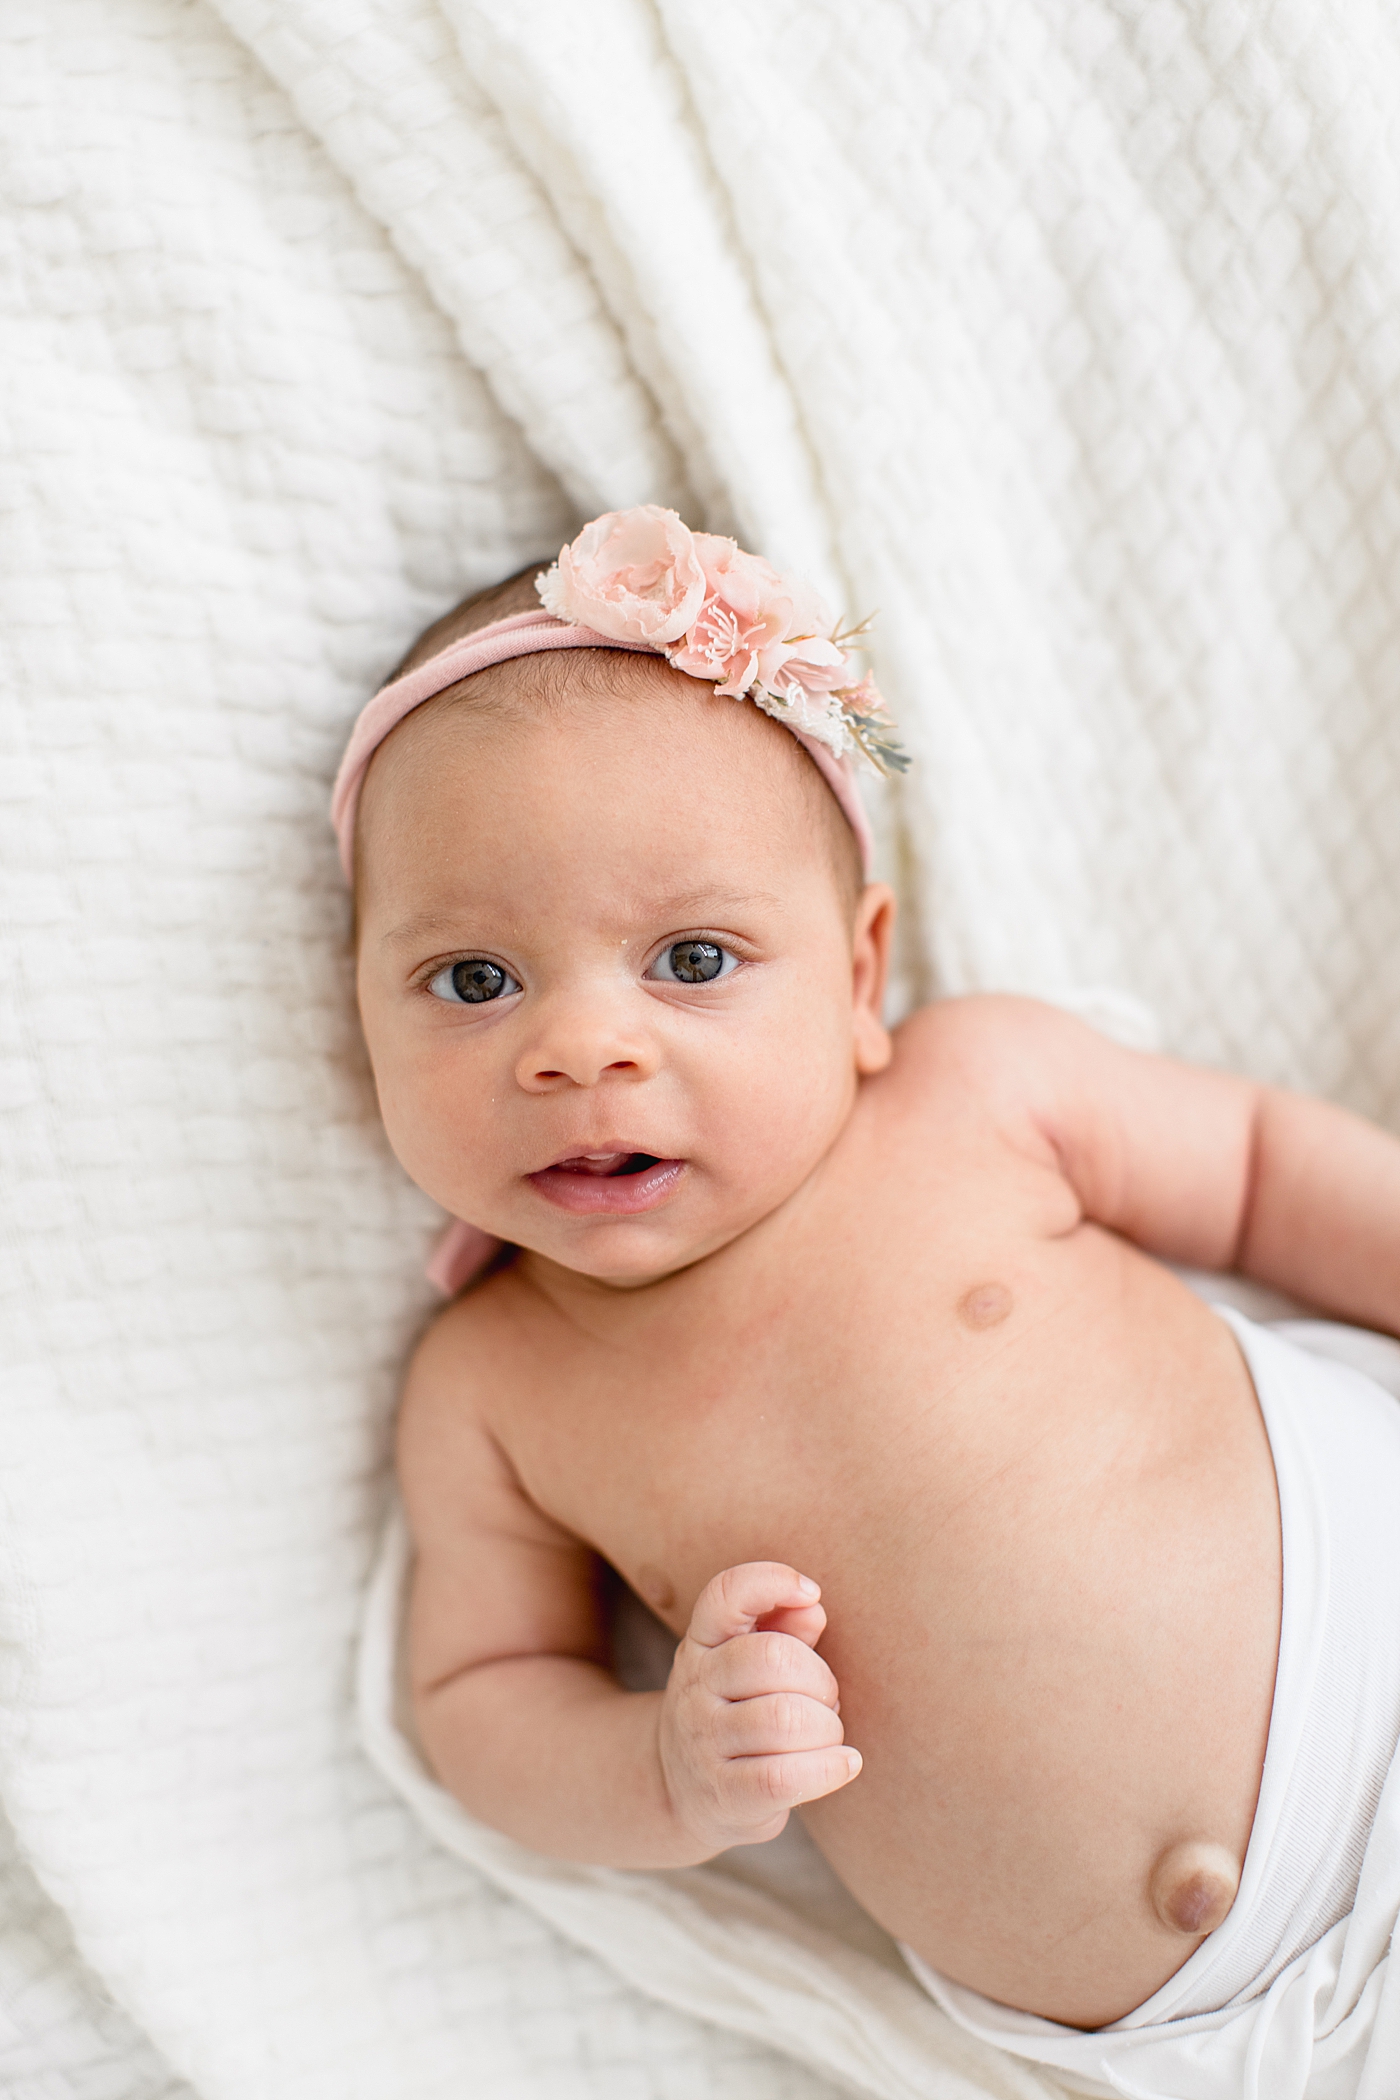 Baby girl newborn session. Photo by Brittany Elise Photography.